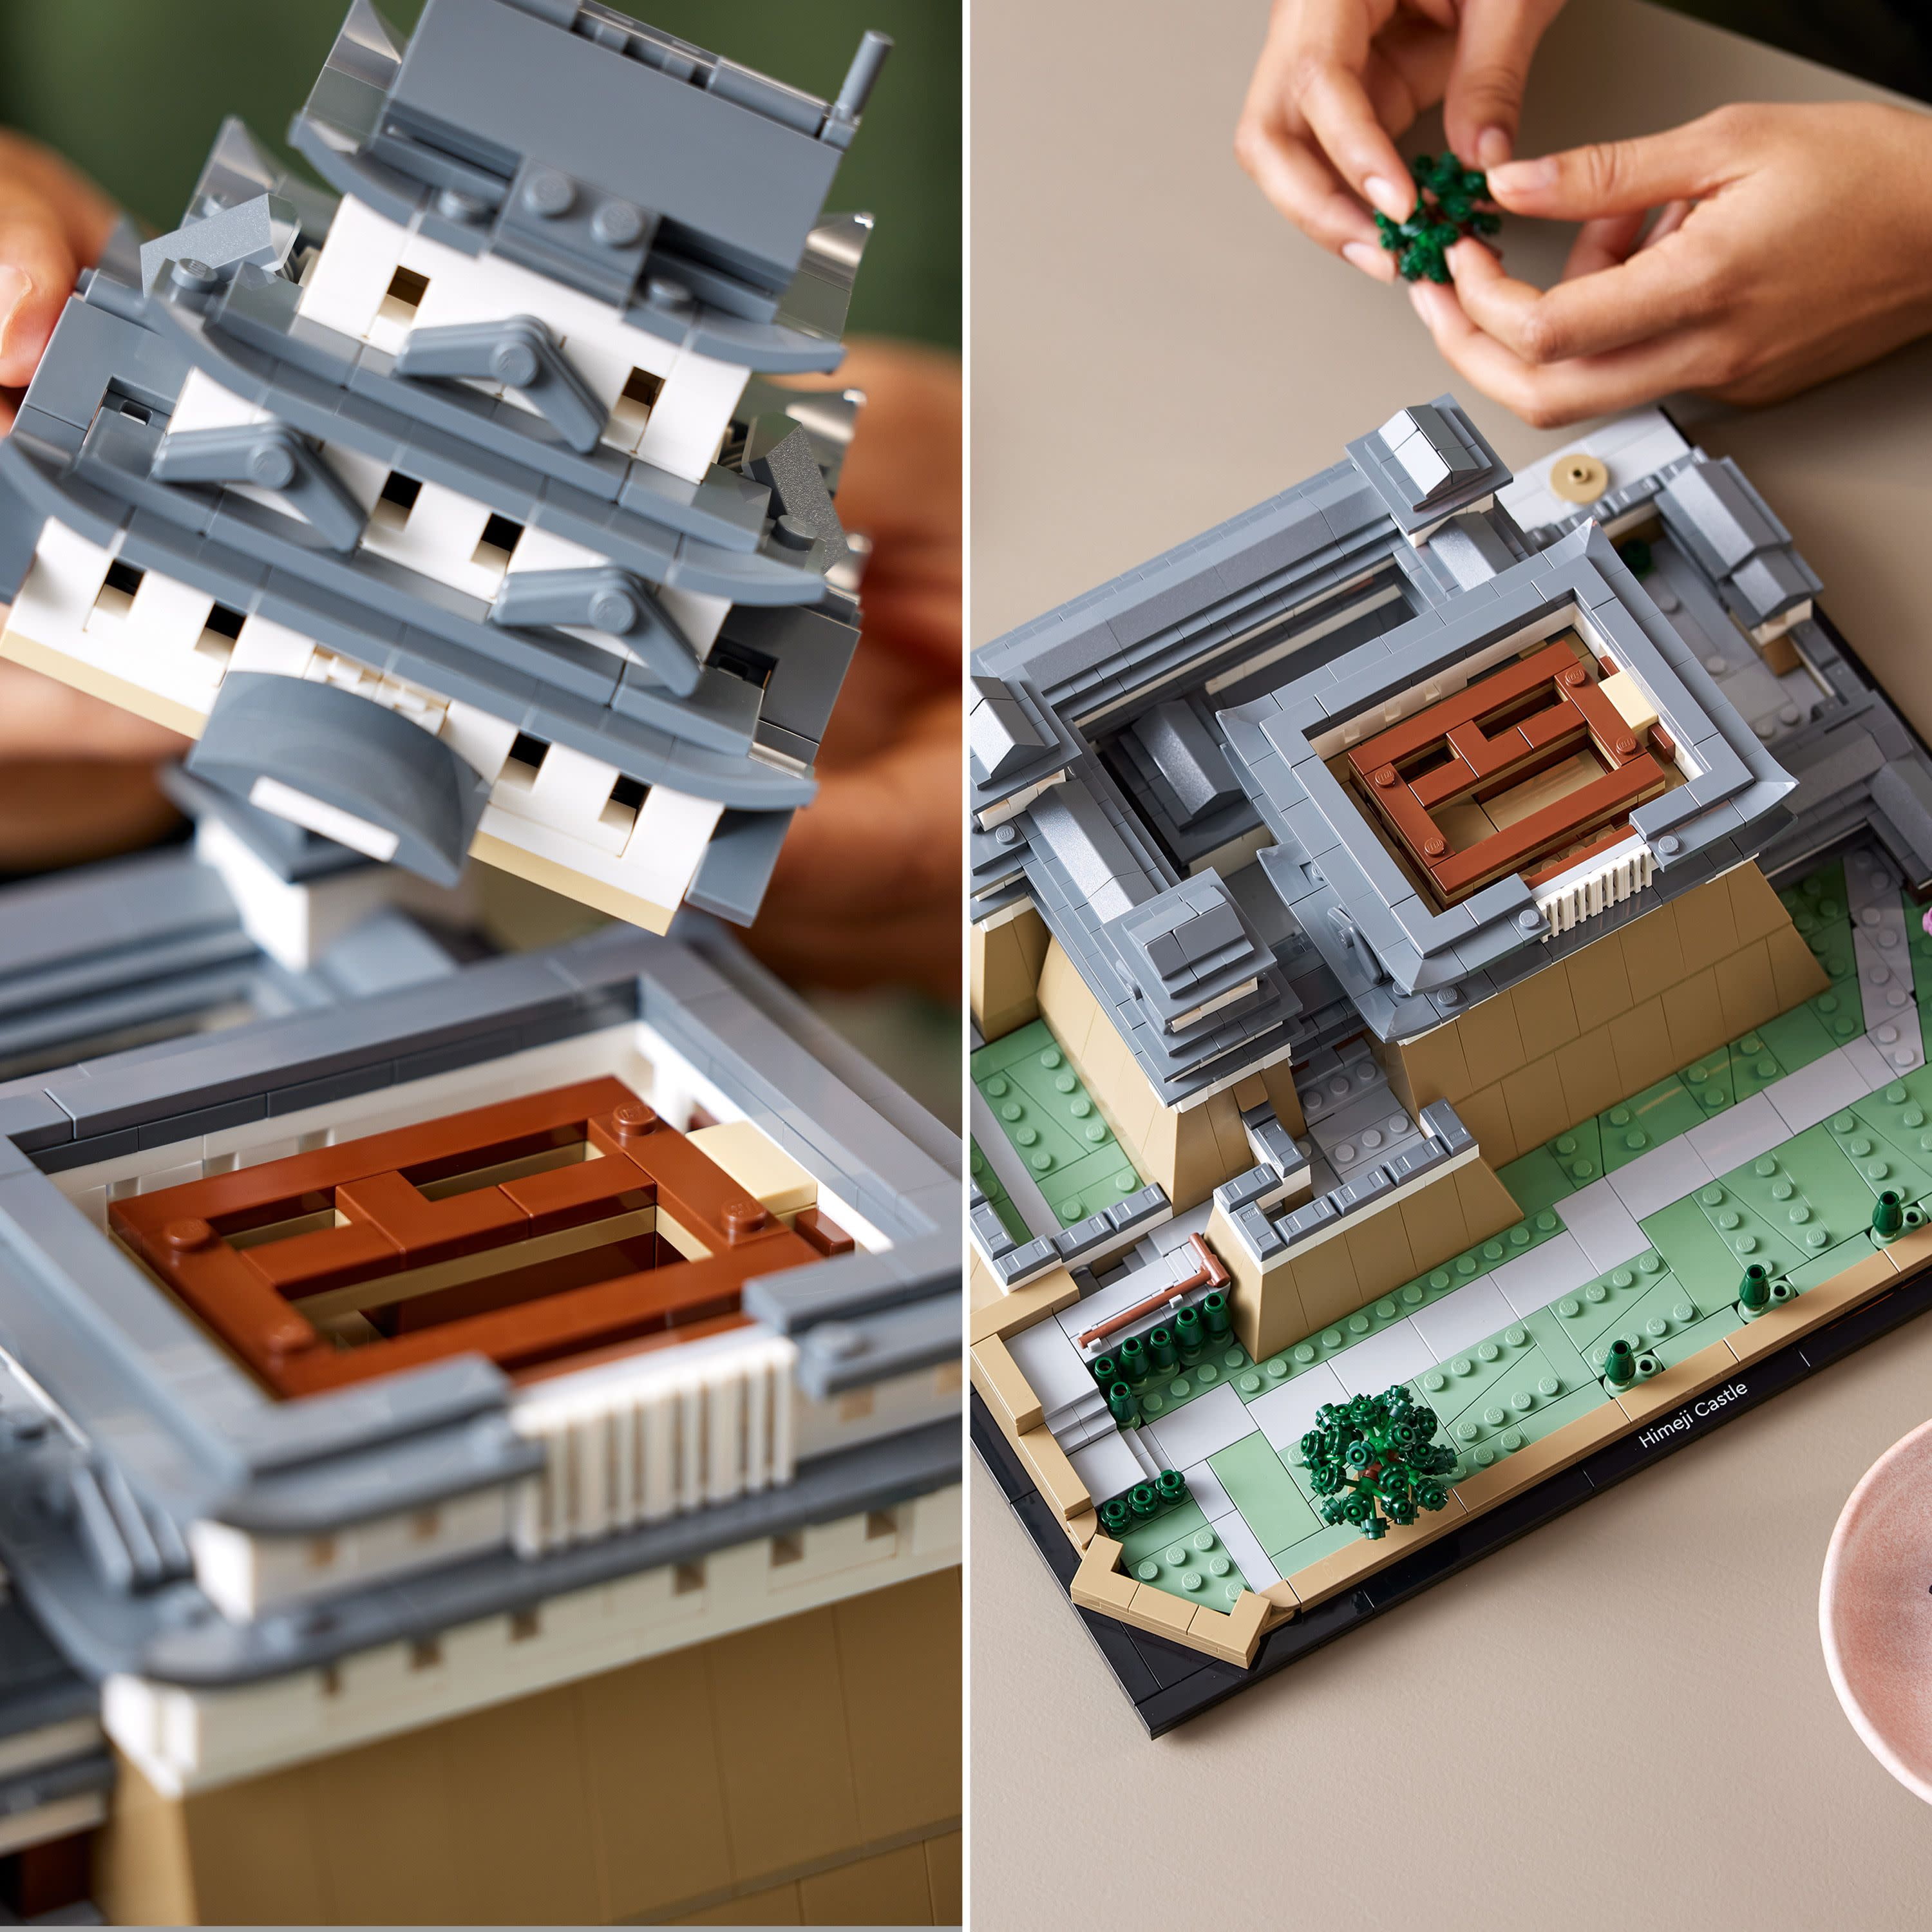 LEGO Architecture Landmarks Collection: Himeji Castle 21060 Building Set,  Build & Display this Collectible Model for Adults, Fun Gift for Lovers of  Japan, Famous Japanese Buildings, History and Travel 